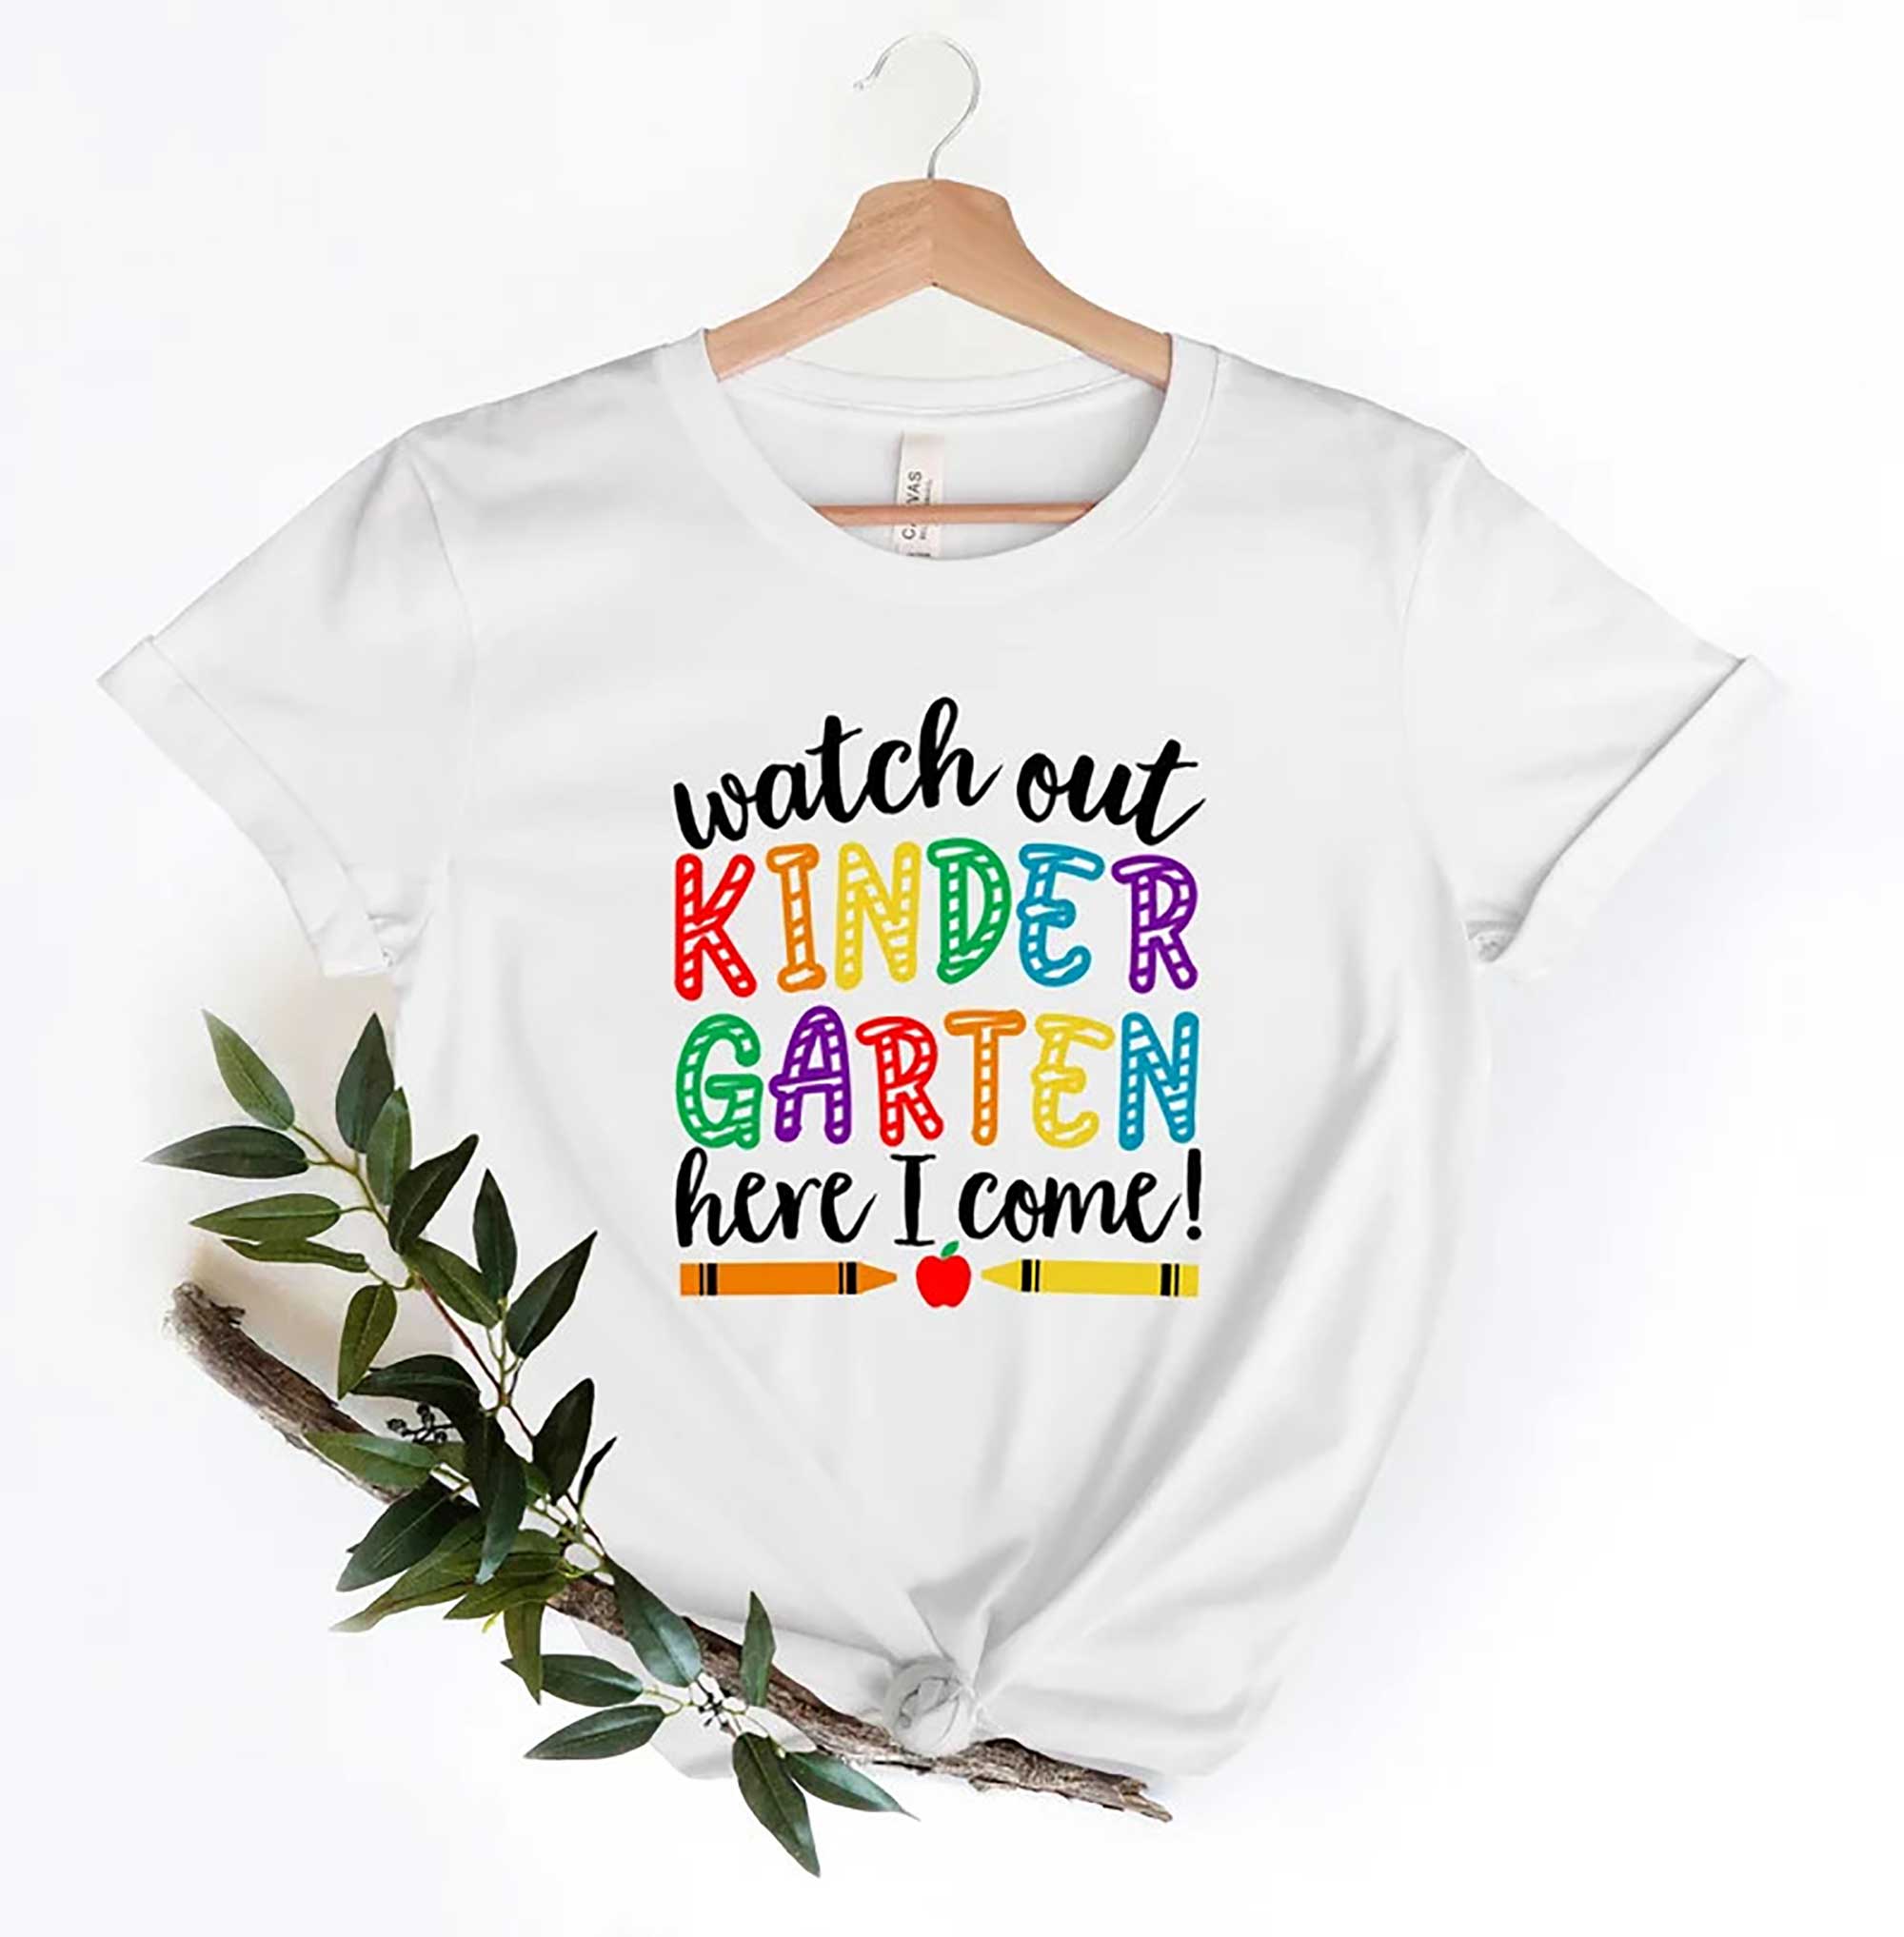 Skitongift Watch Out Kindergarten Here I Come, Kindergarten Shirt, Back To School Shirt, Watch Out Kindergarten Here I Come School Shirt, School shirt